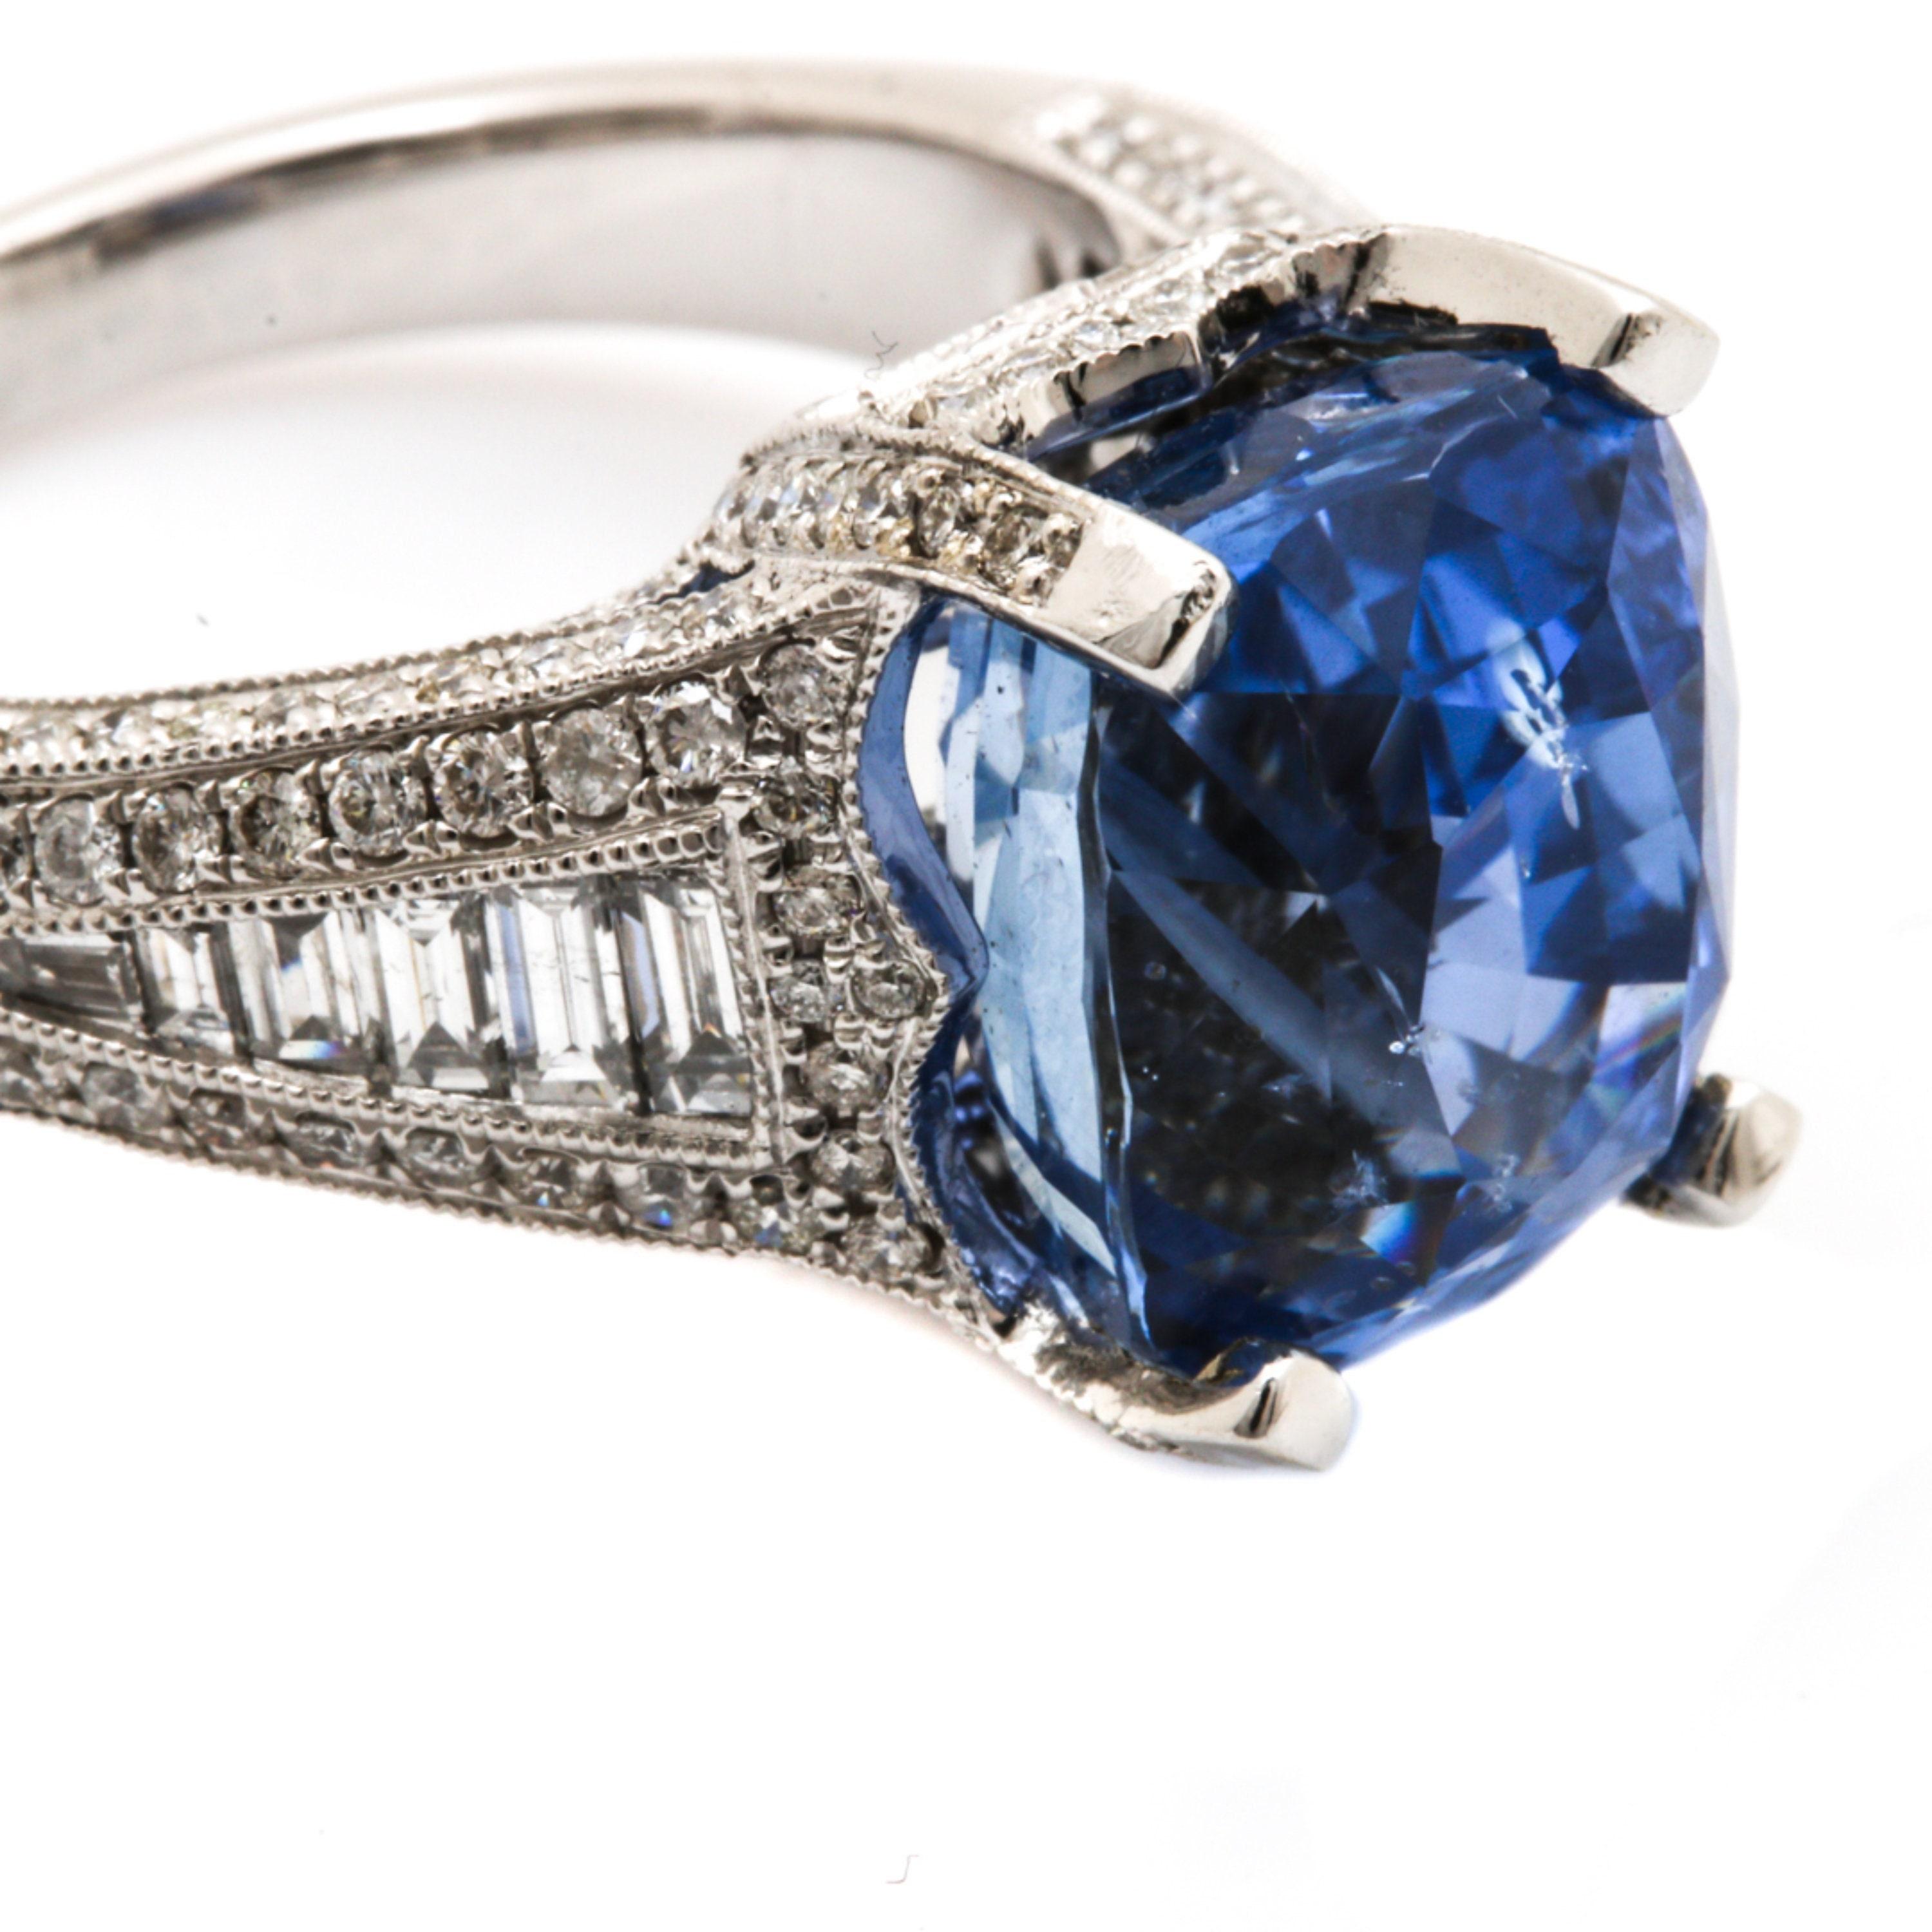 For Sale:  7 Carat Natural Sapphire Diamond Engagement Ring Set in 18K Gold, Cocktail Ring 5